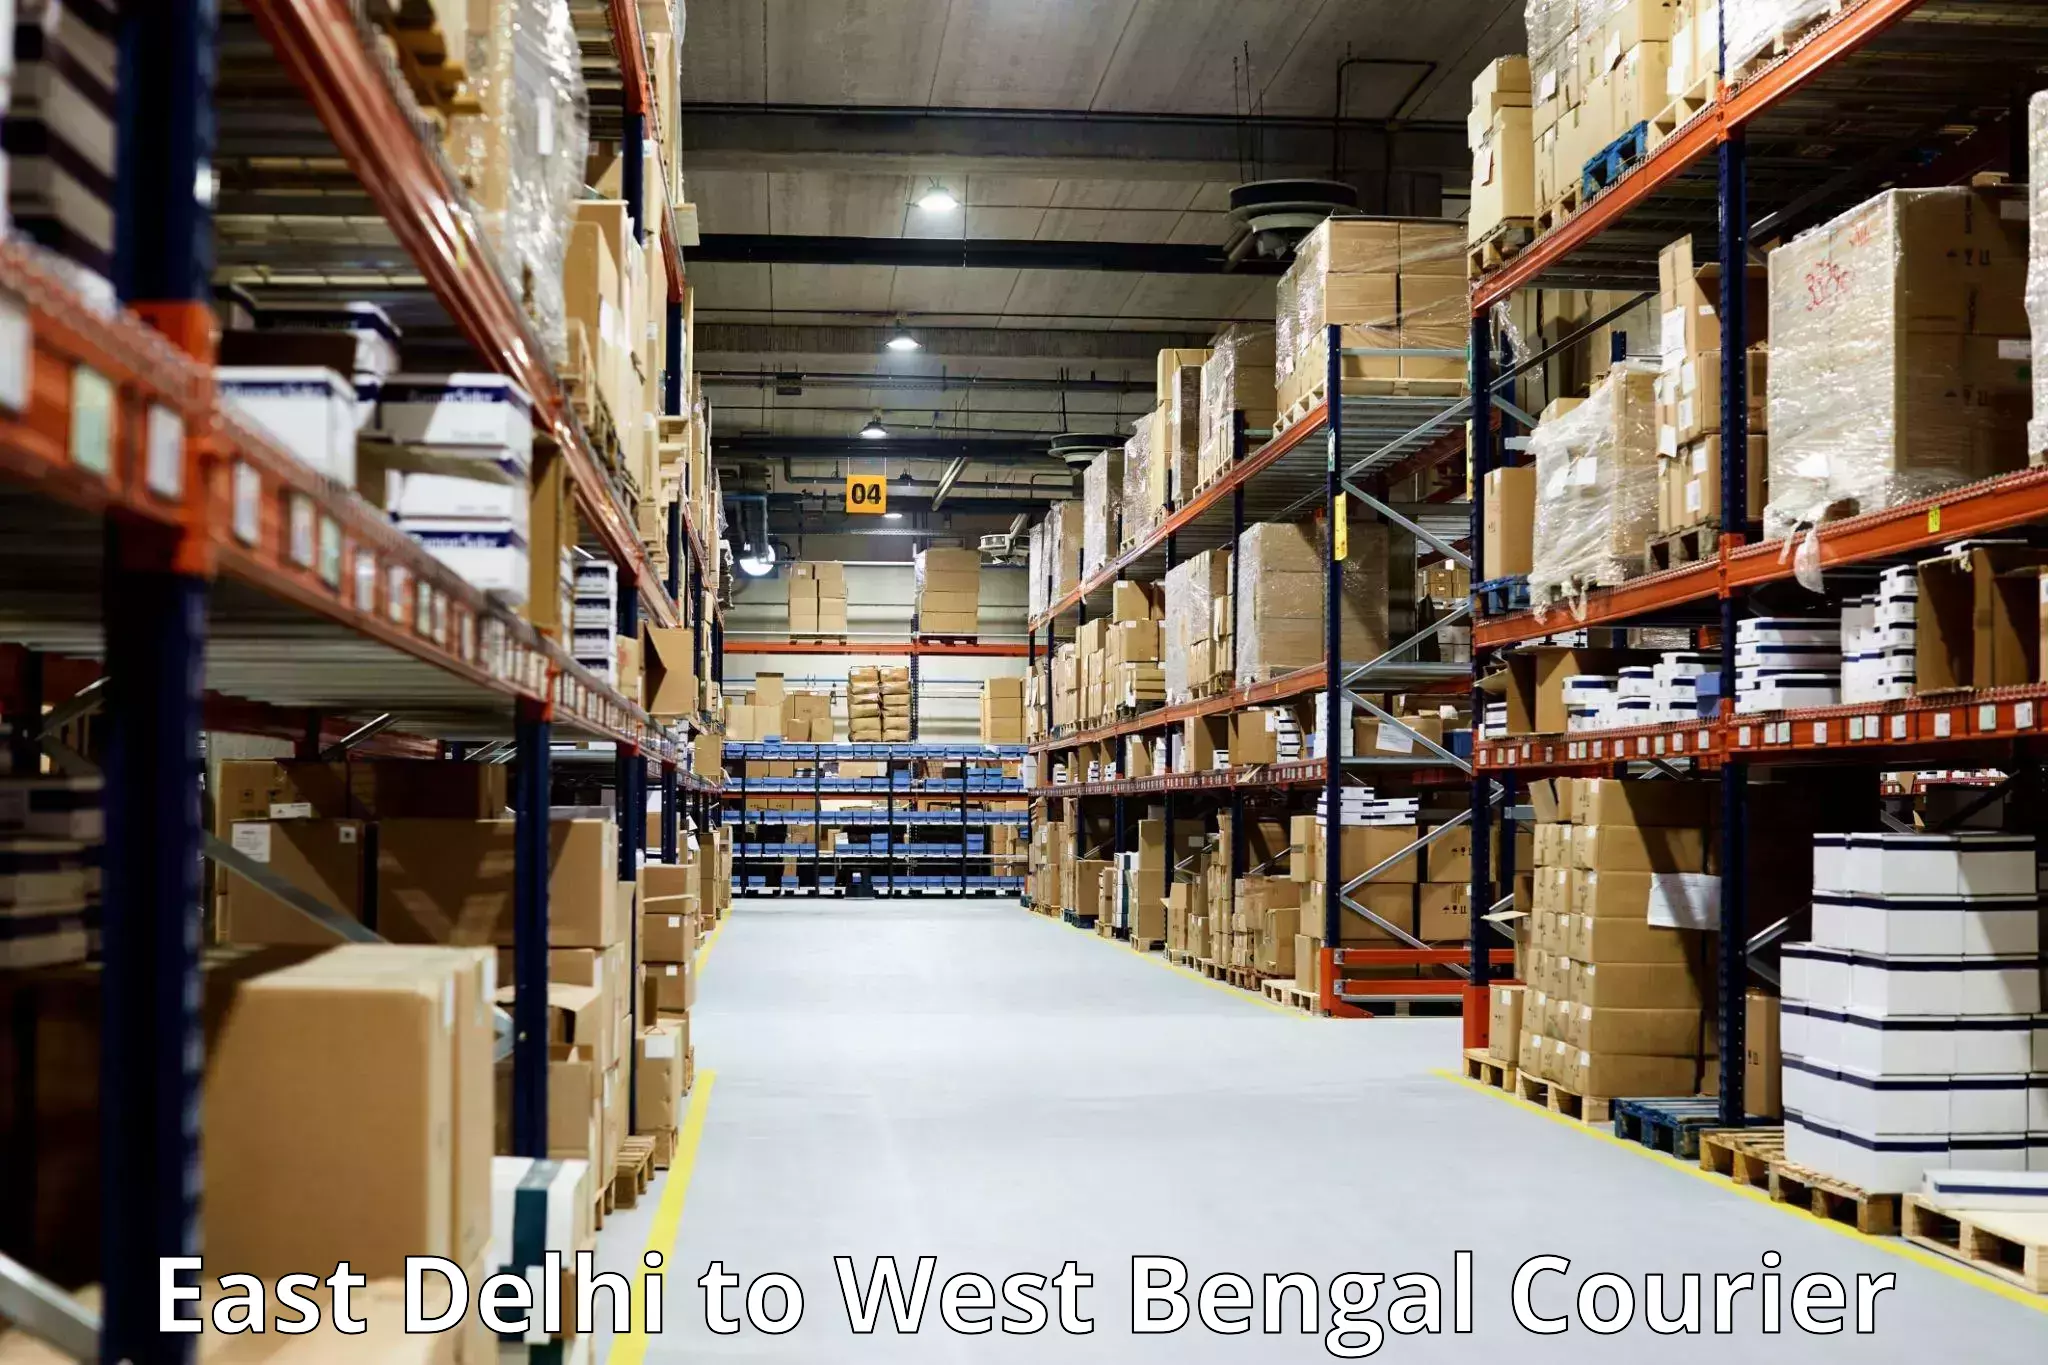 Baggage transport technology in East Delhi to West Bengal